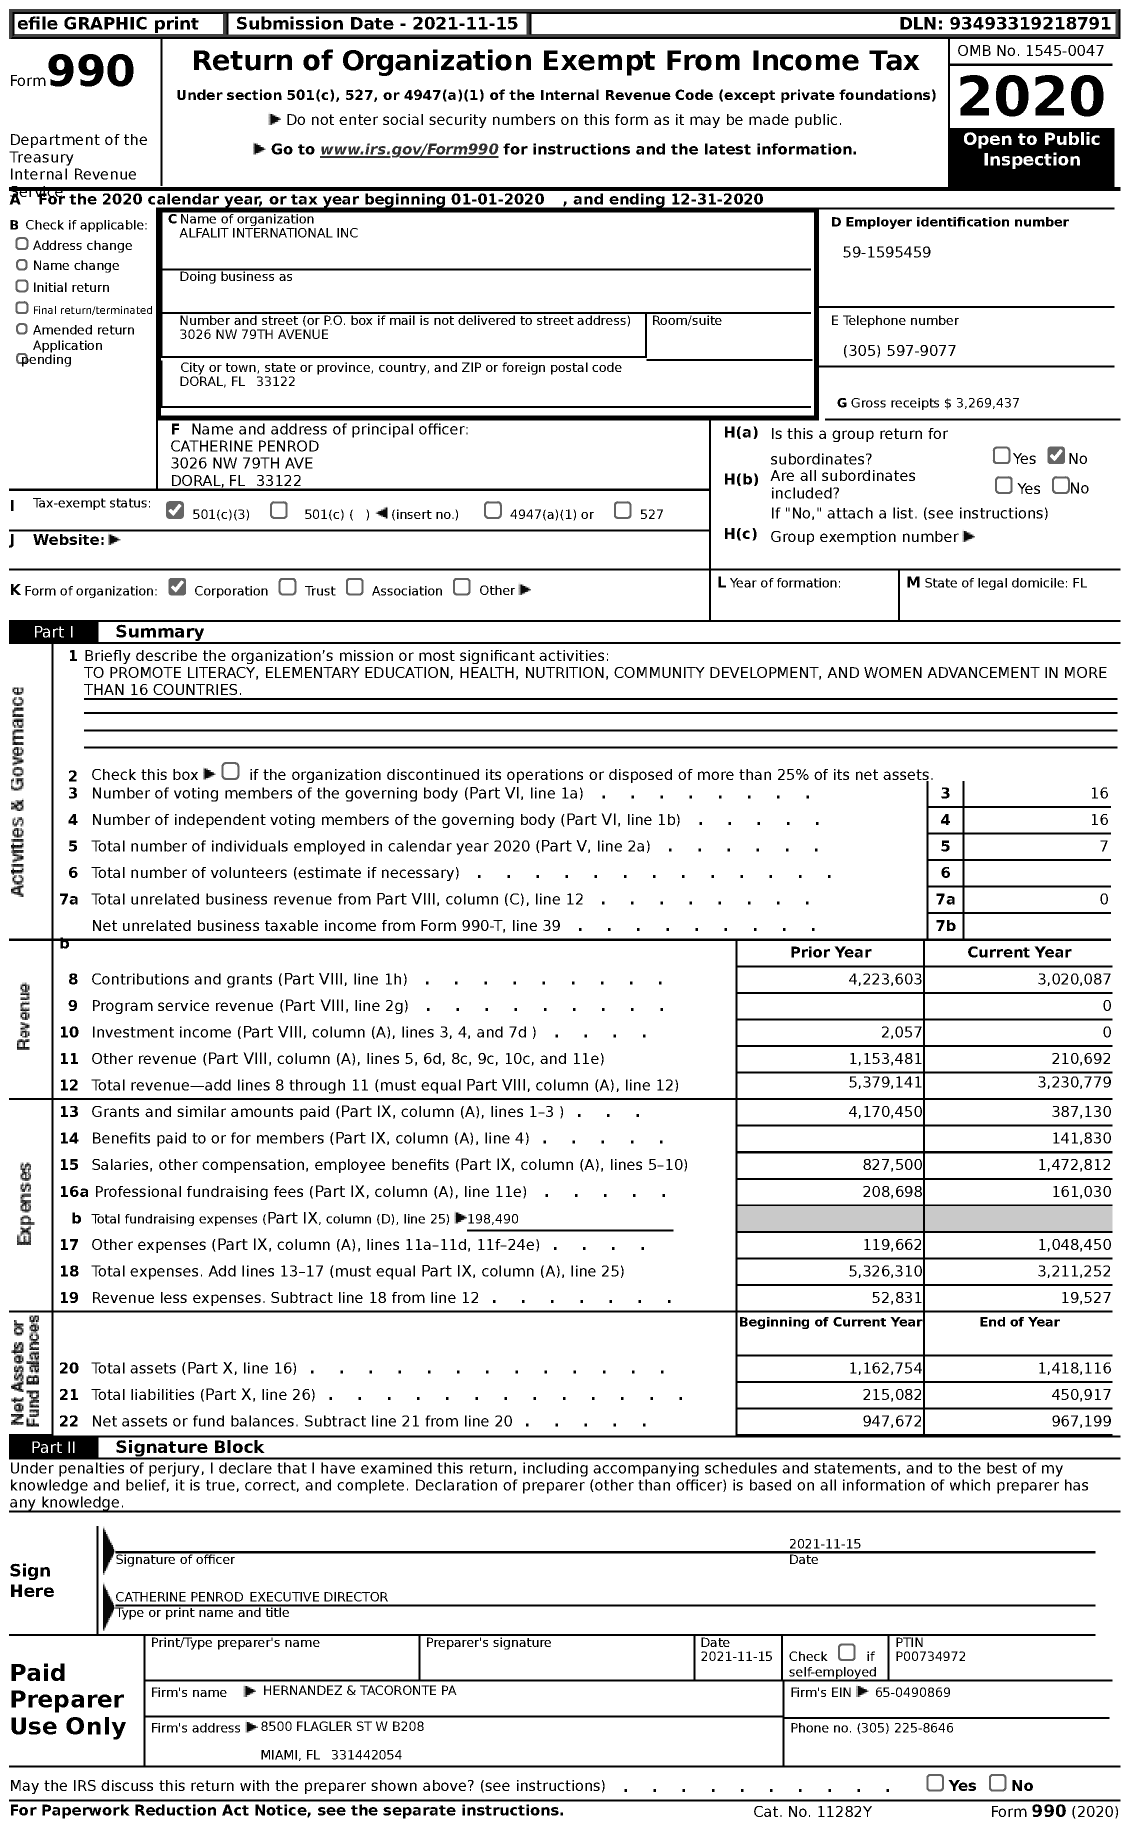 Image of first page of 2020 Form 990 for Alfalit International